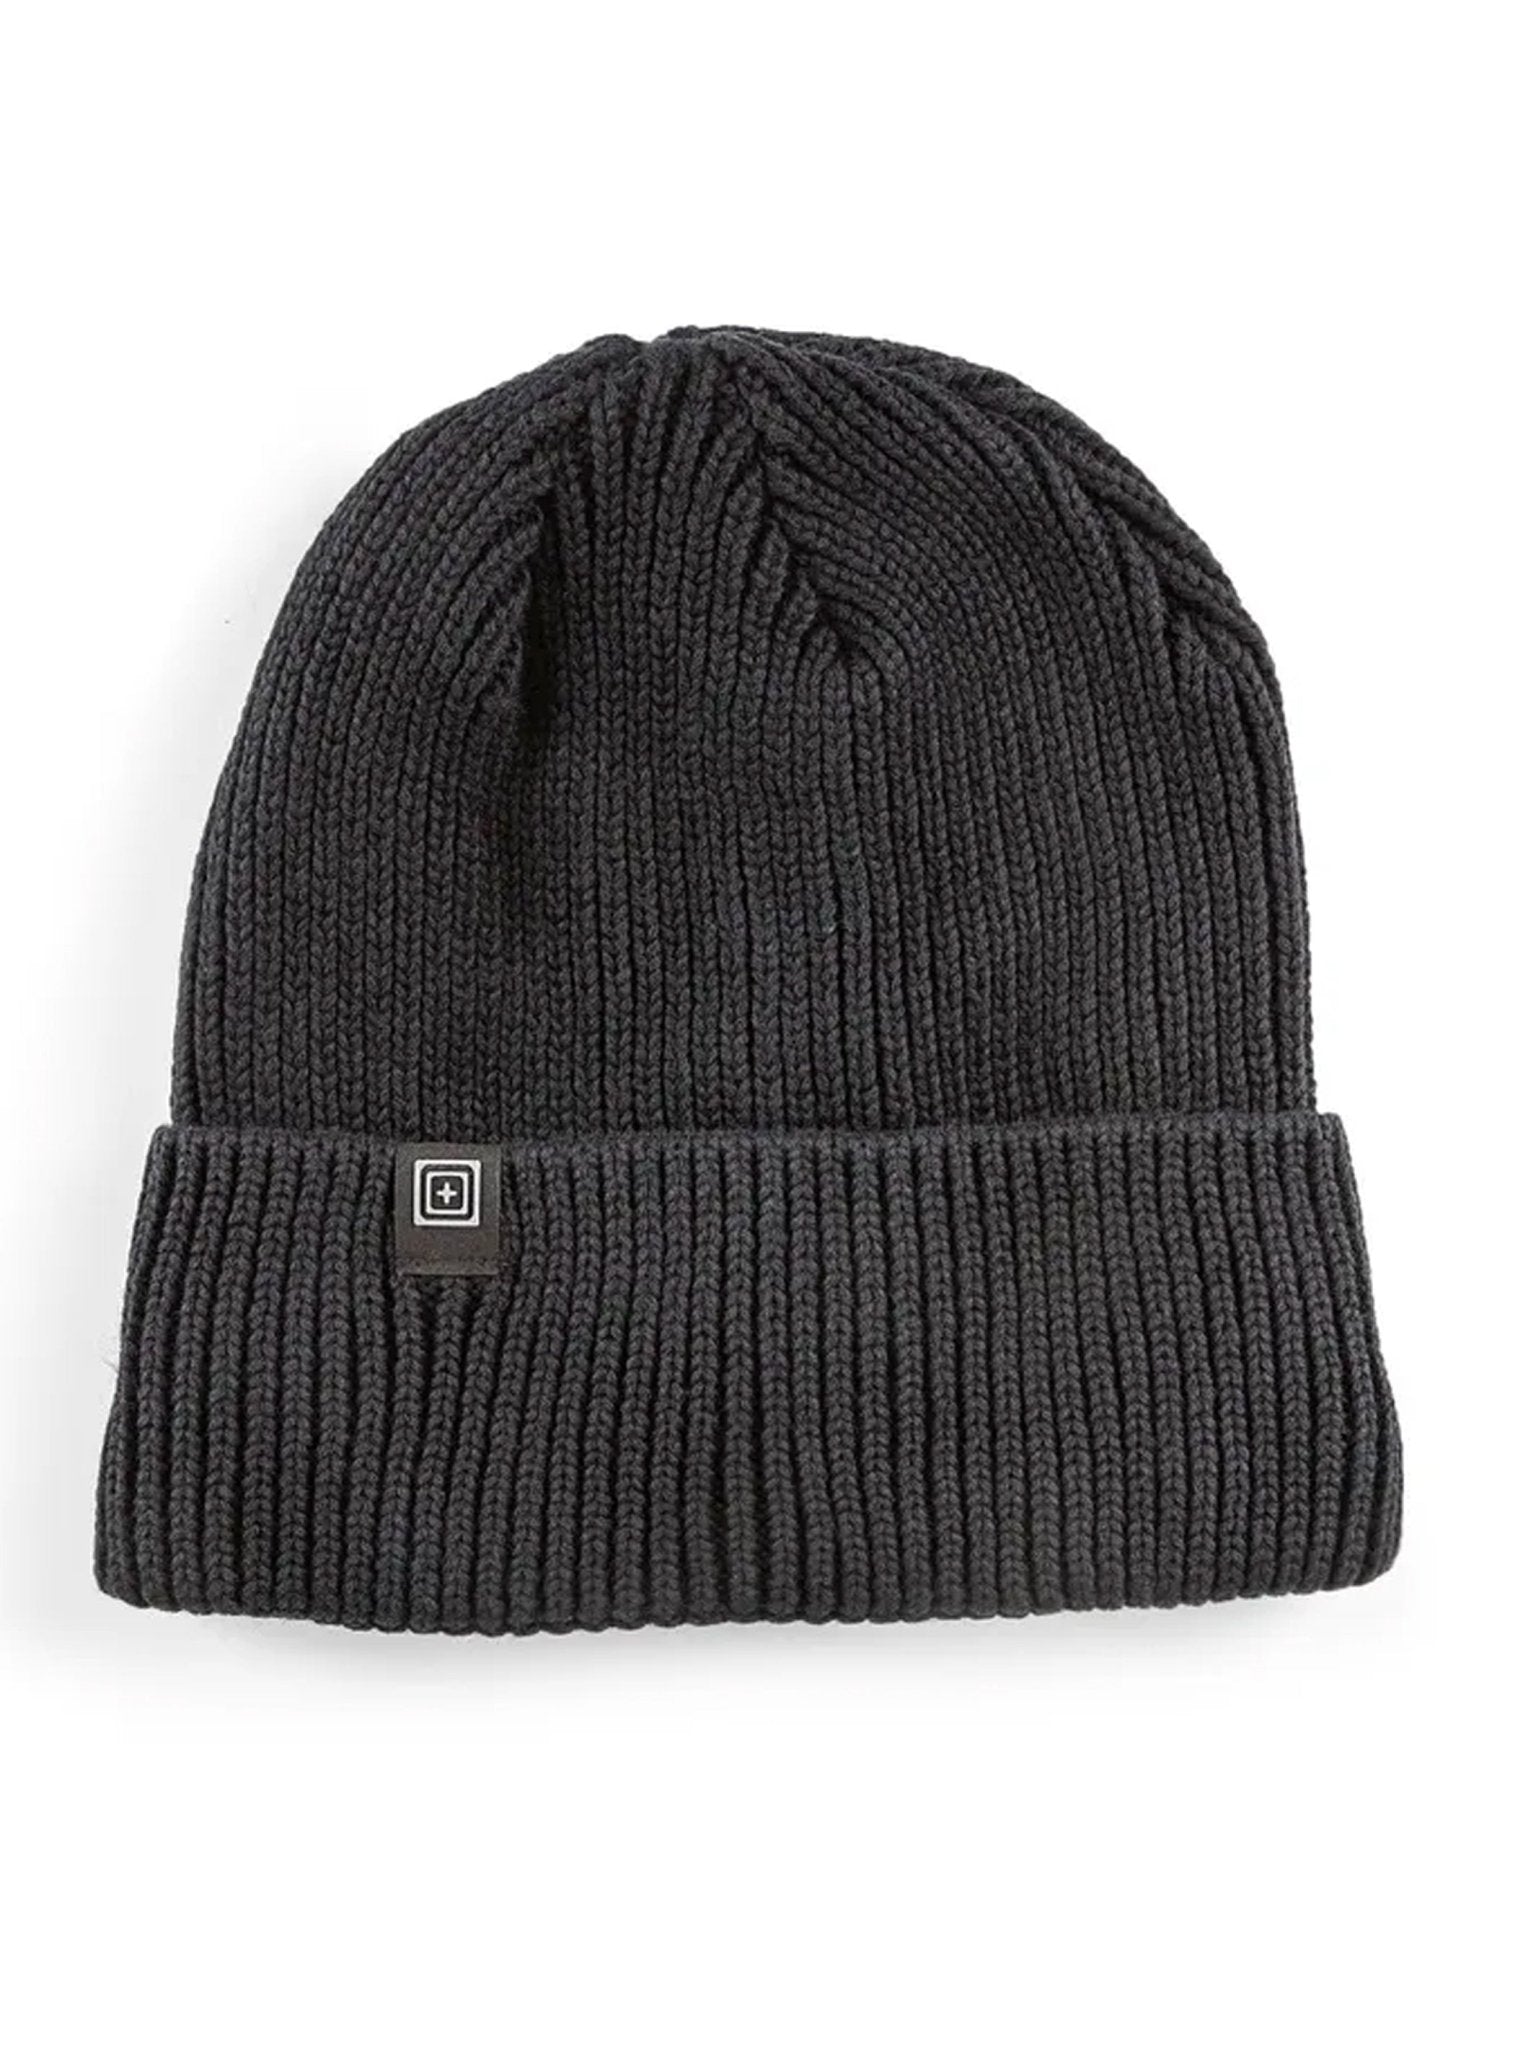 4elementsclothing5.11 Tactical5.11 Tactical - 5.11 Tactical Cotton Knitted Boistel Beanie Hat - Style 89163Hats89163-019